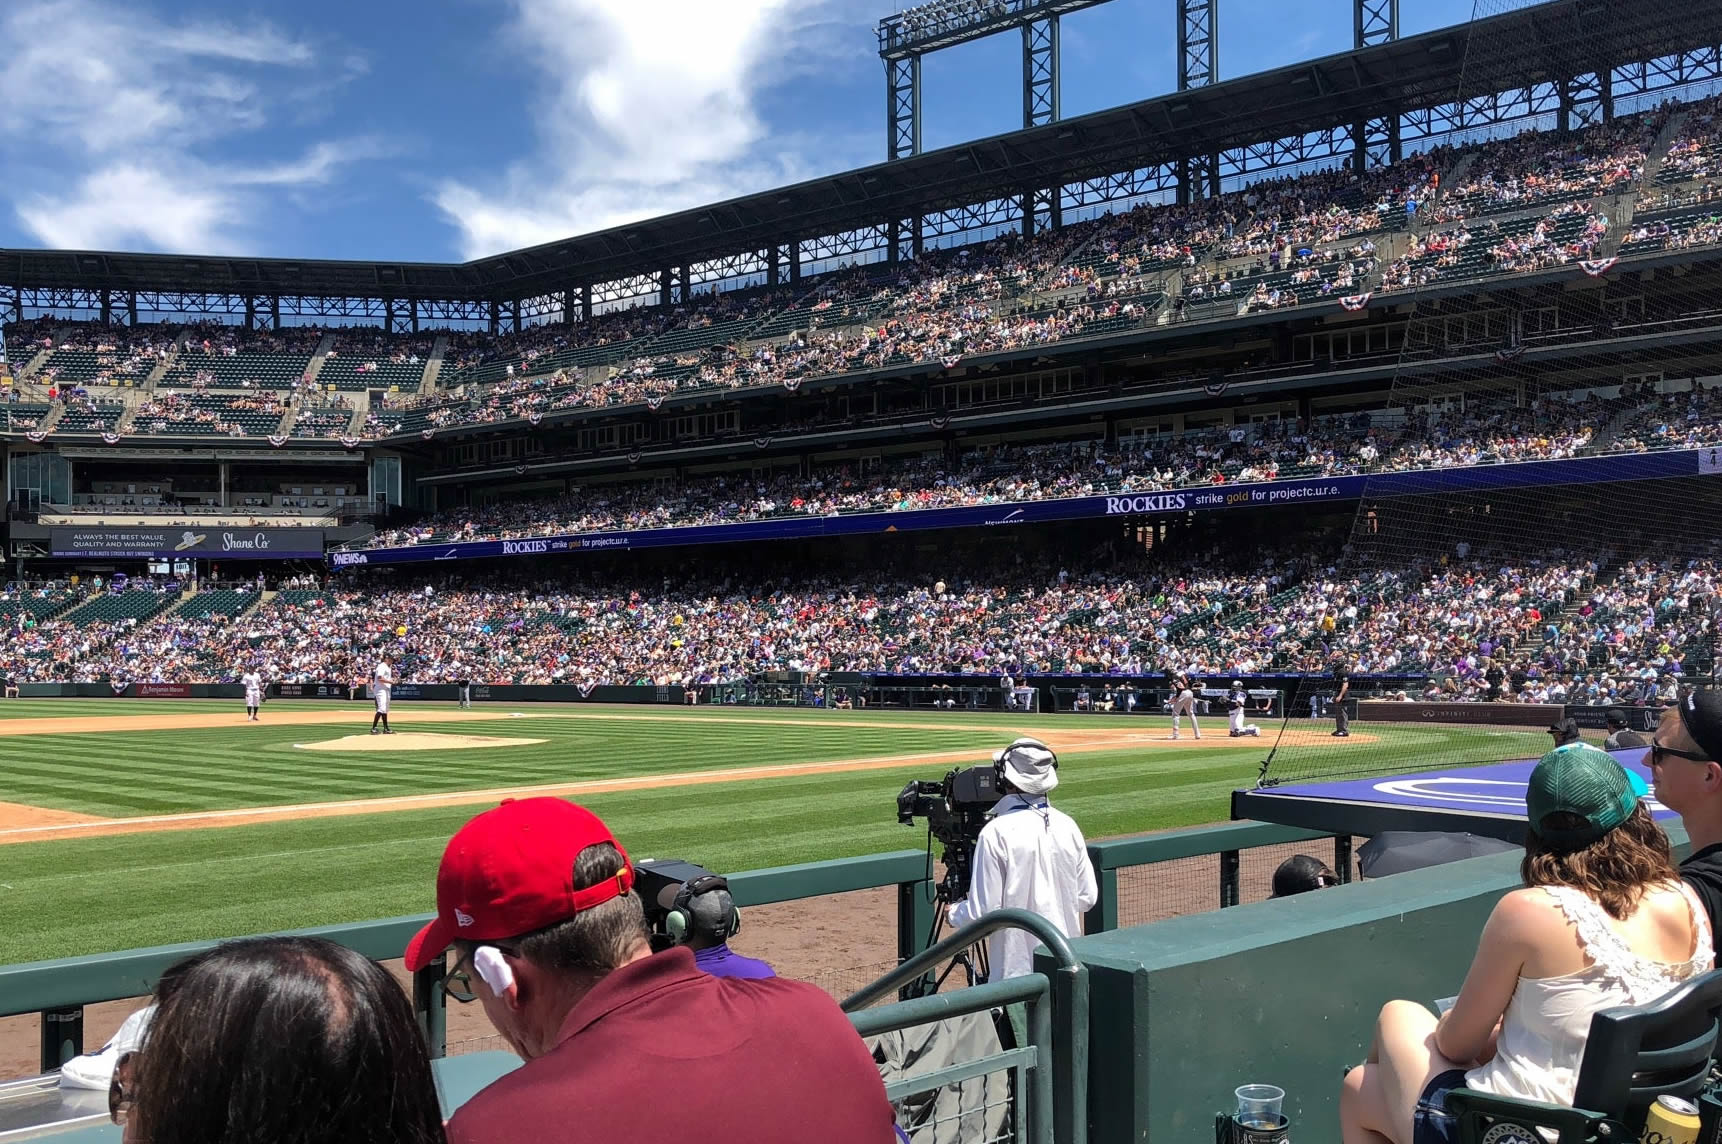 section 140, row 5 seat view  - coors field